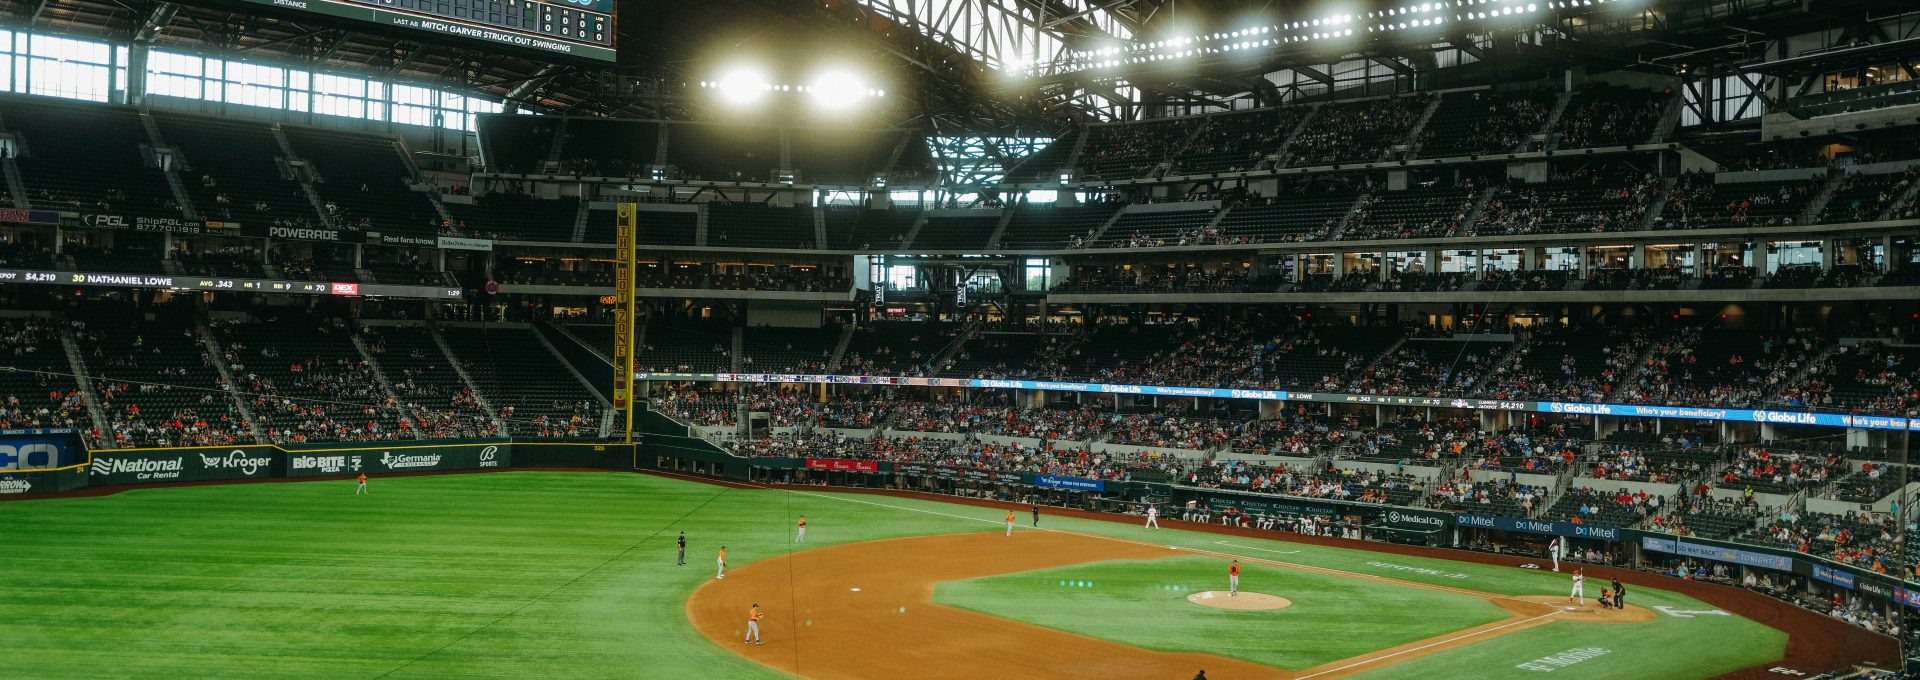 a baseball stadium with a full crowd